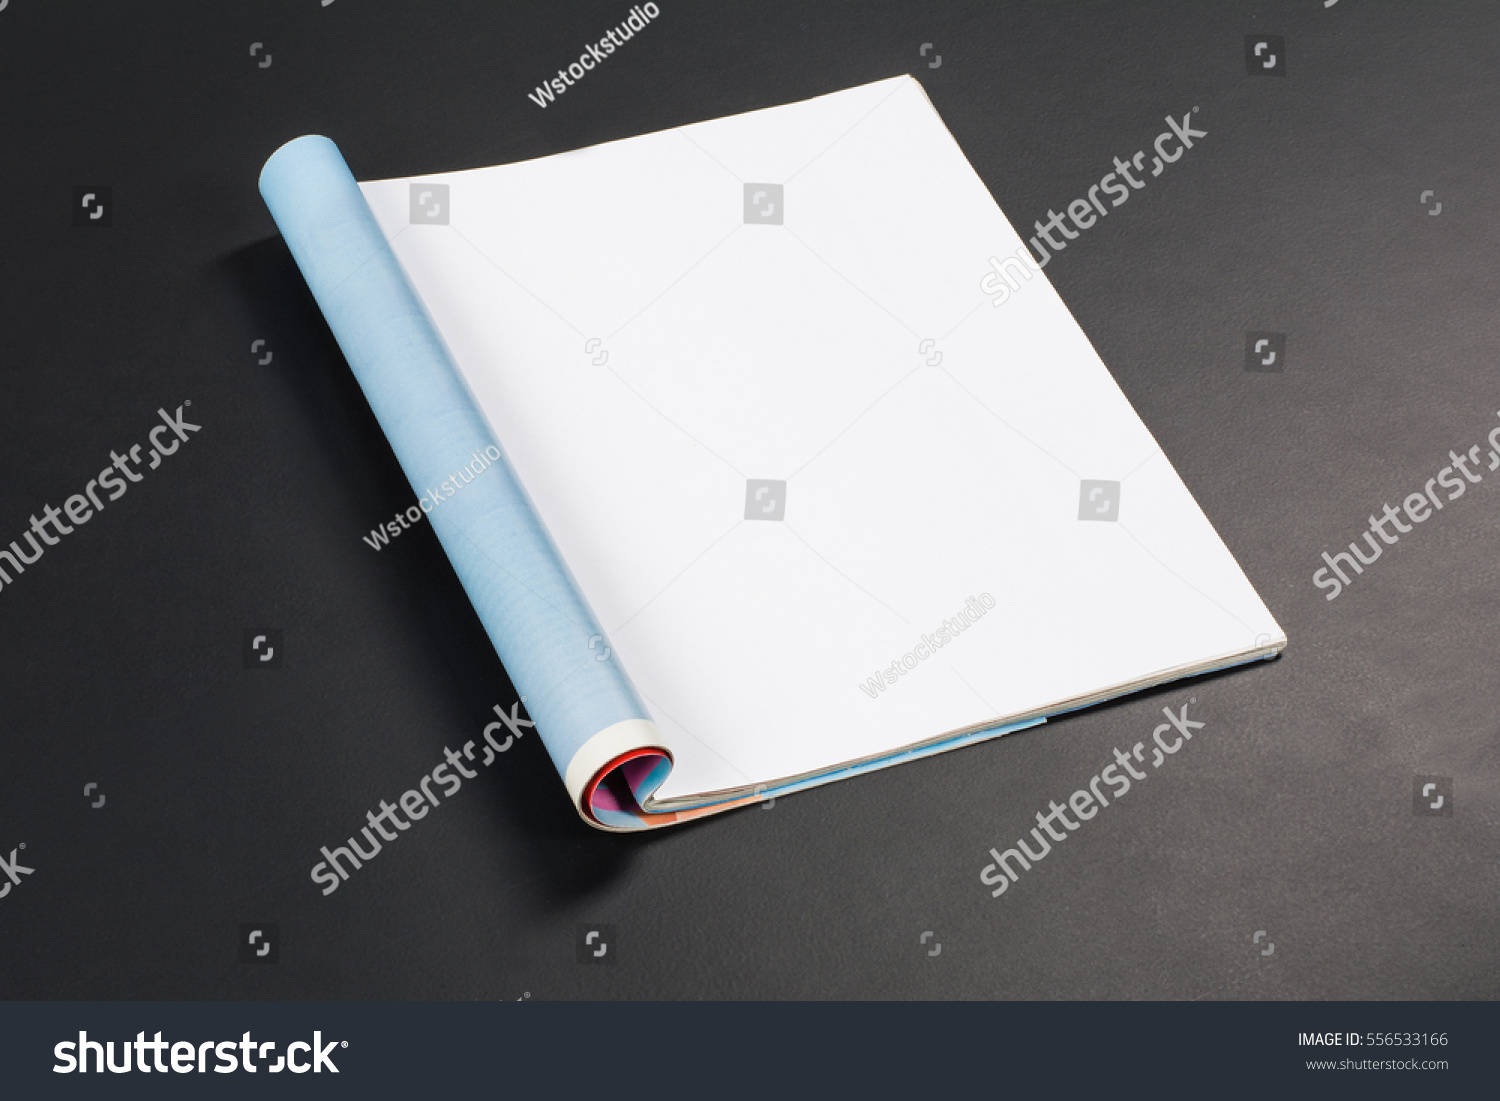 Mock-up magazine or catalog on black chalkboard. Blank page or notepad on black table background. Blank page or notepad for mockups or simulations. #556533166